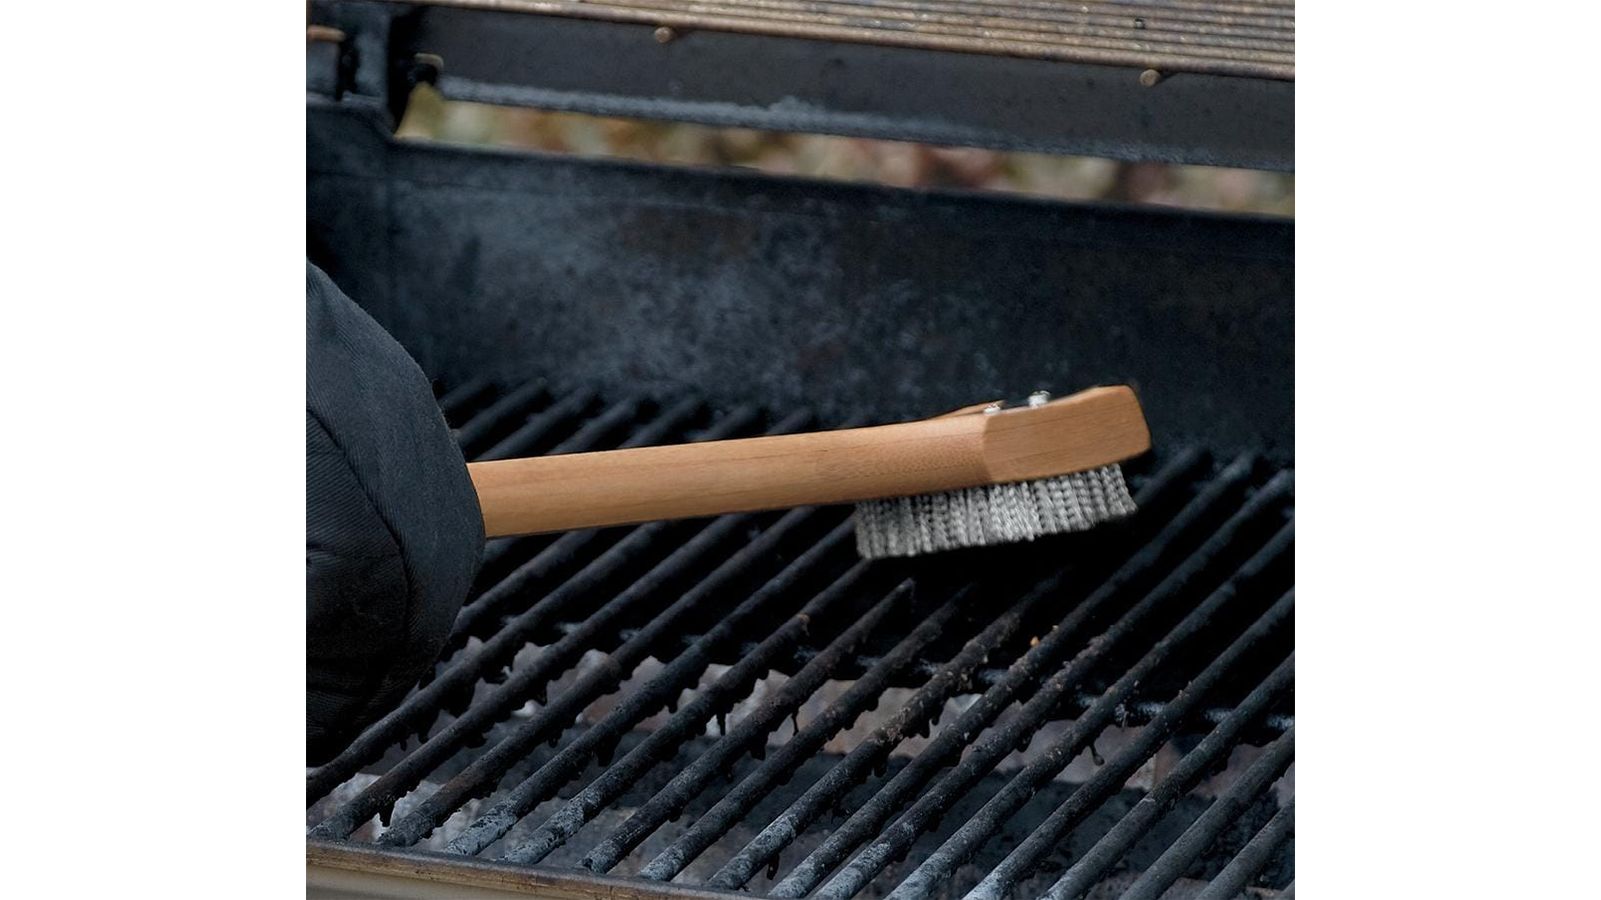 Grill Brush Cleaner  BBQ Brush for Grills, Kitchen & Air Fryer